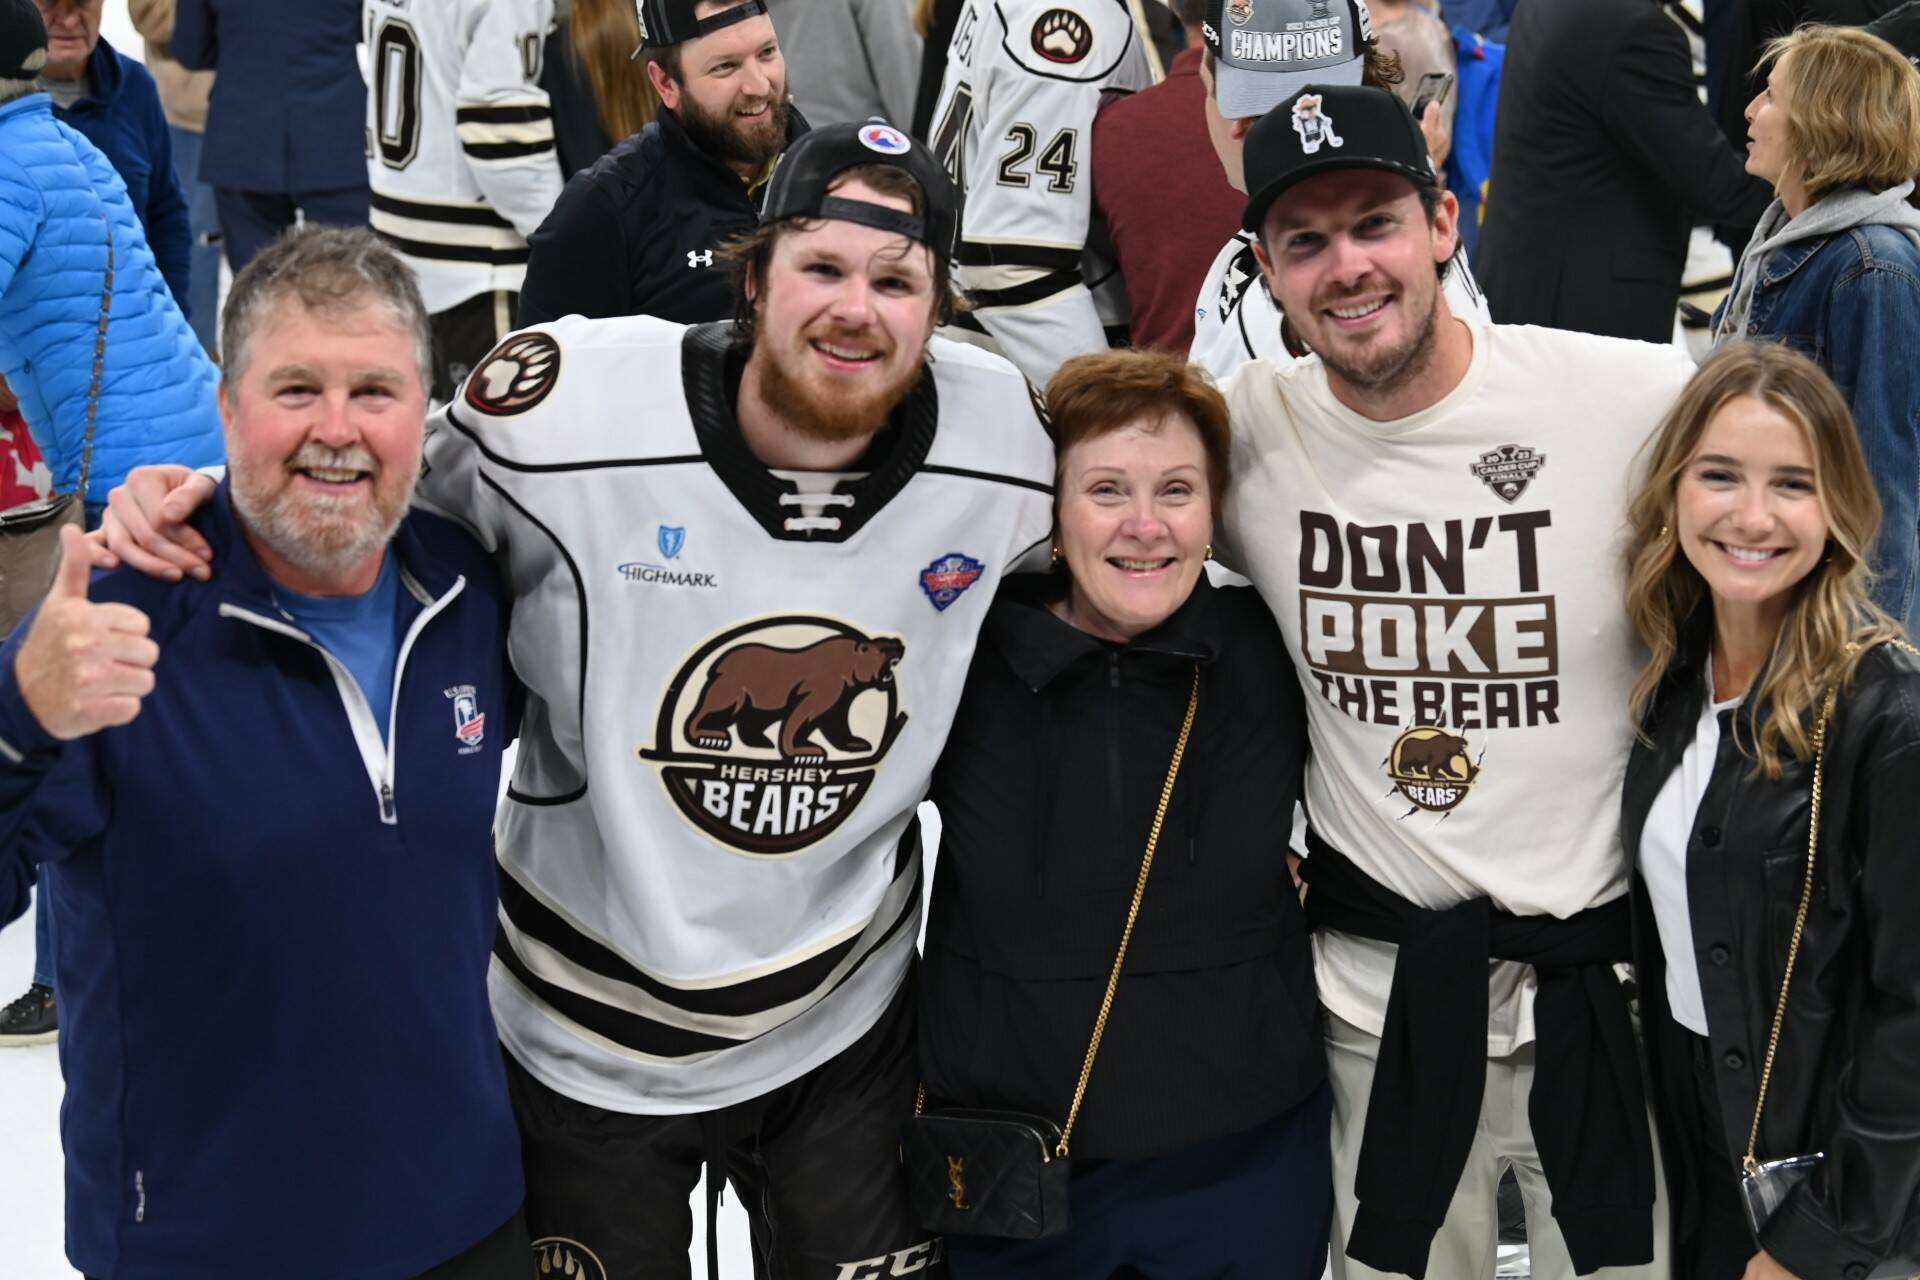 Hershey Bears Final Game of the Season Has Special Surprise for Fans  (Photos)